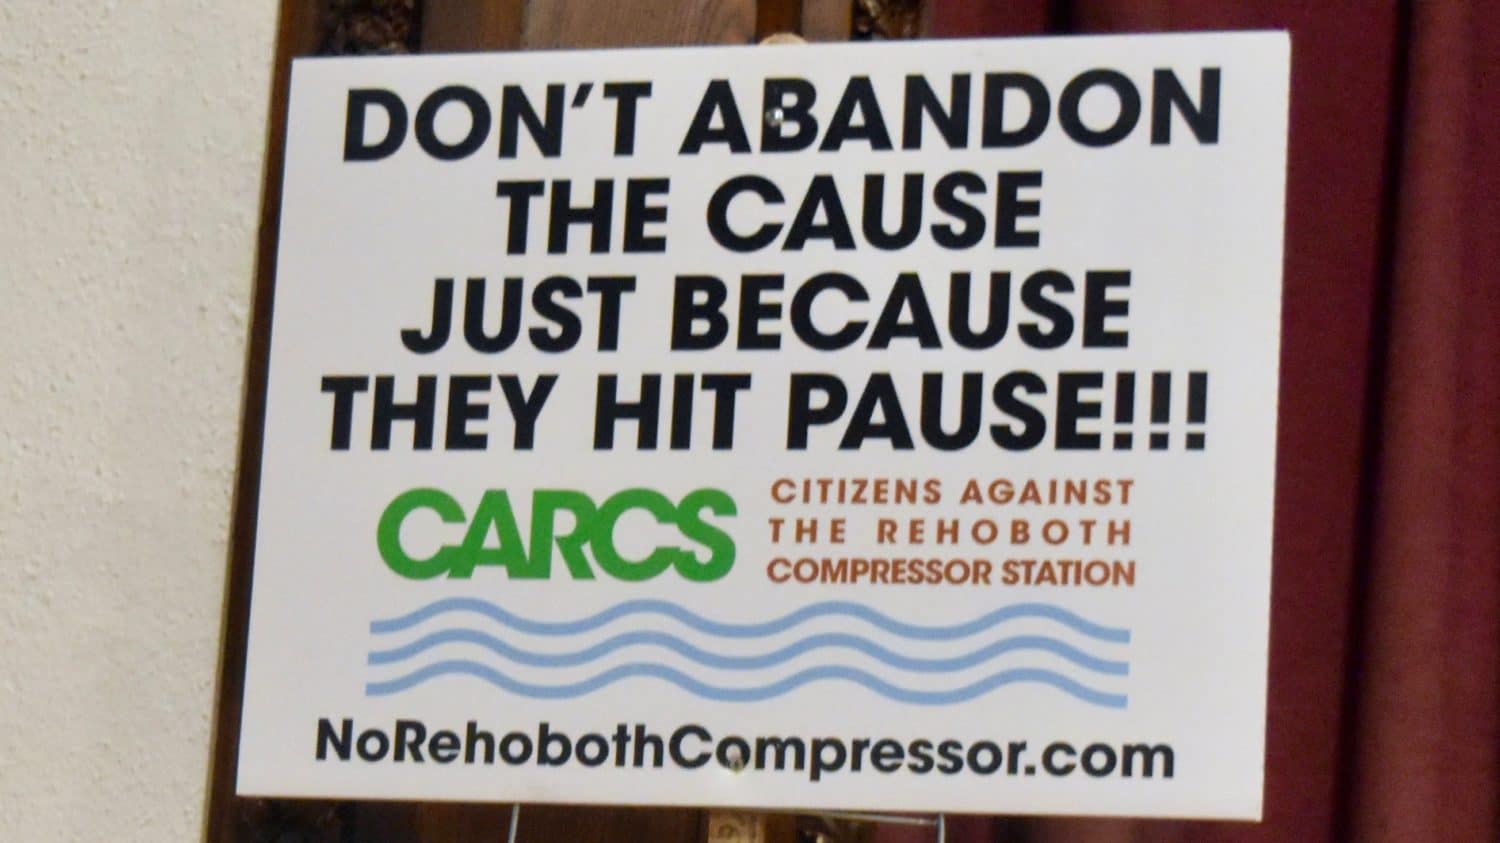 Not resting on a ‘win’ against fossil fuel compressor station, Rehoboth prepares itself for round two, with the help of elected officials